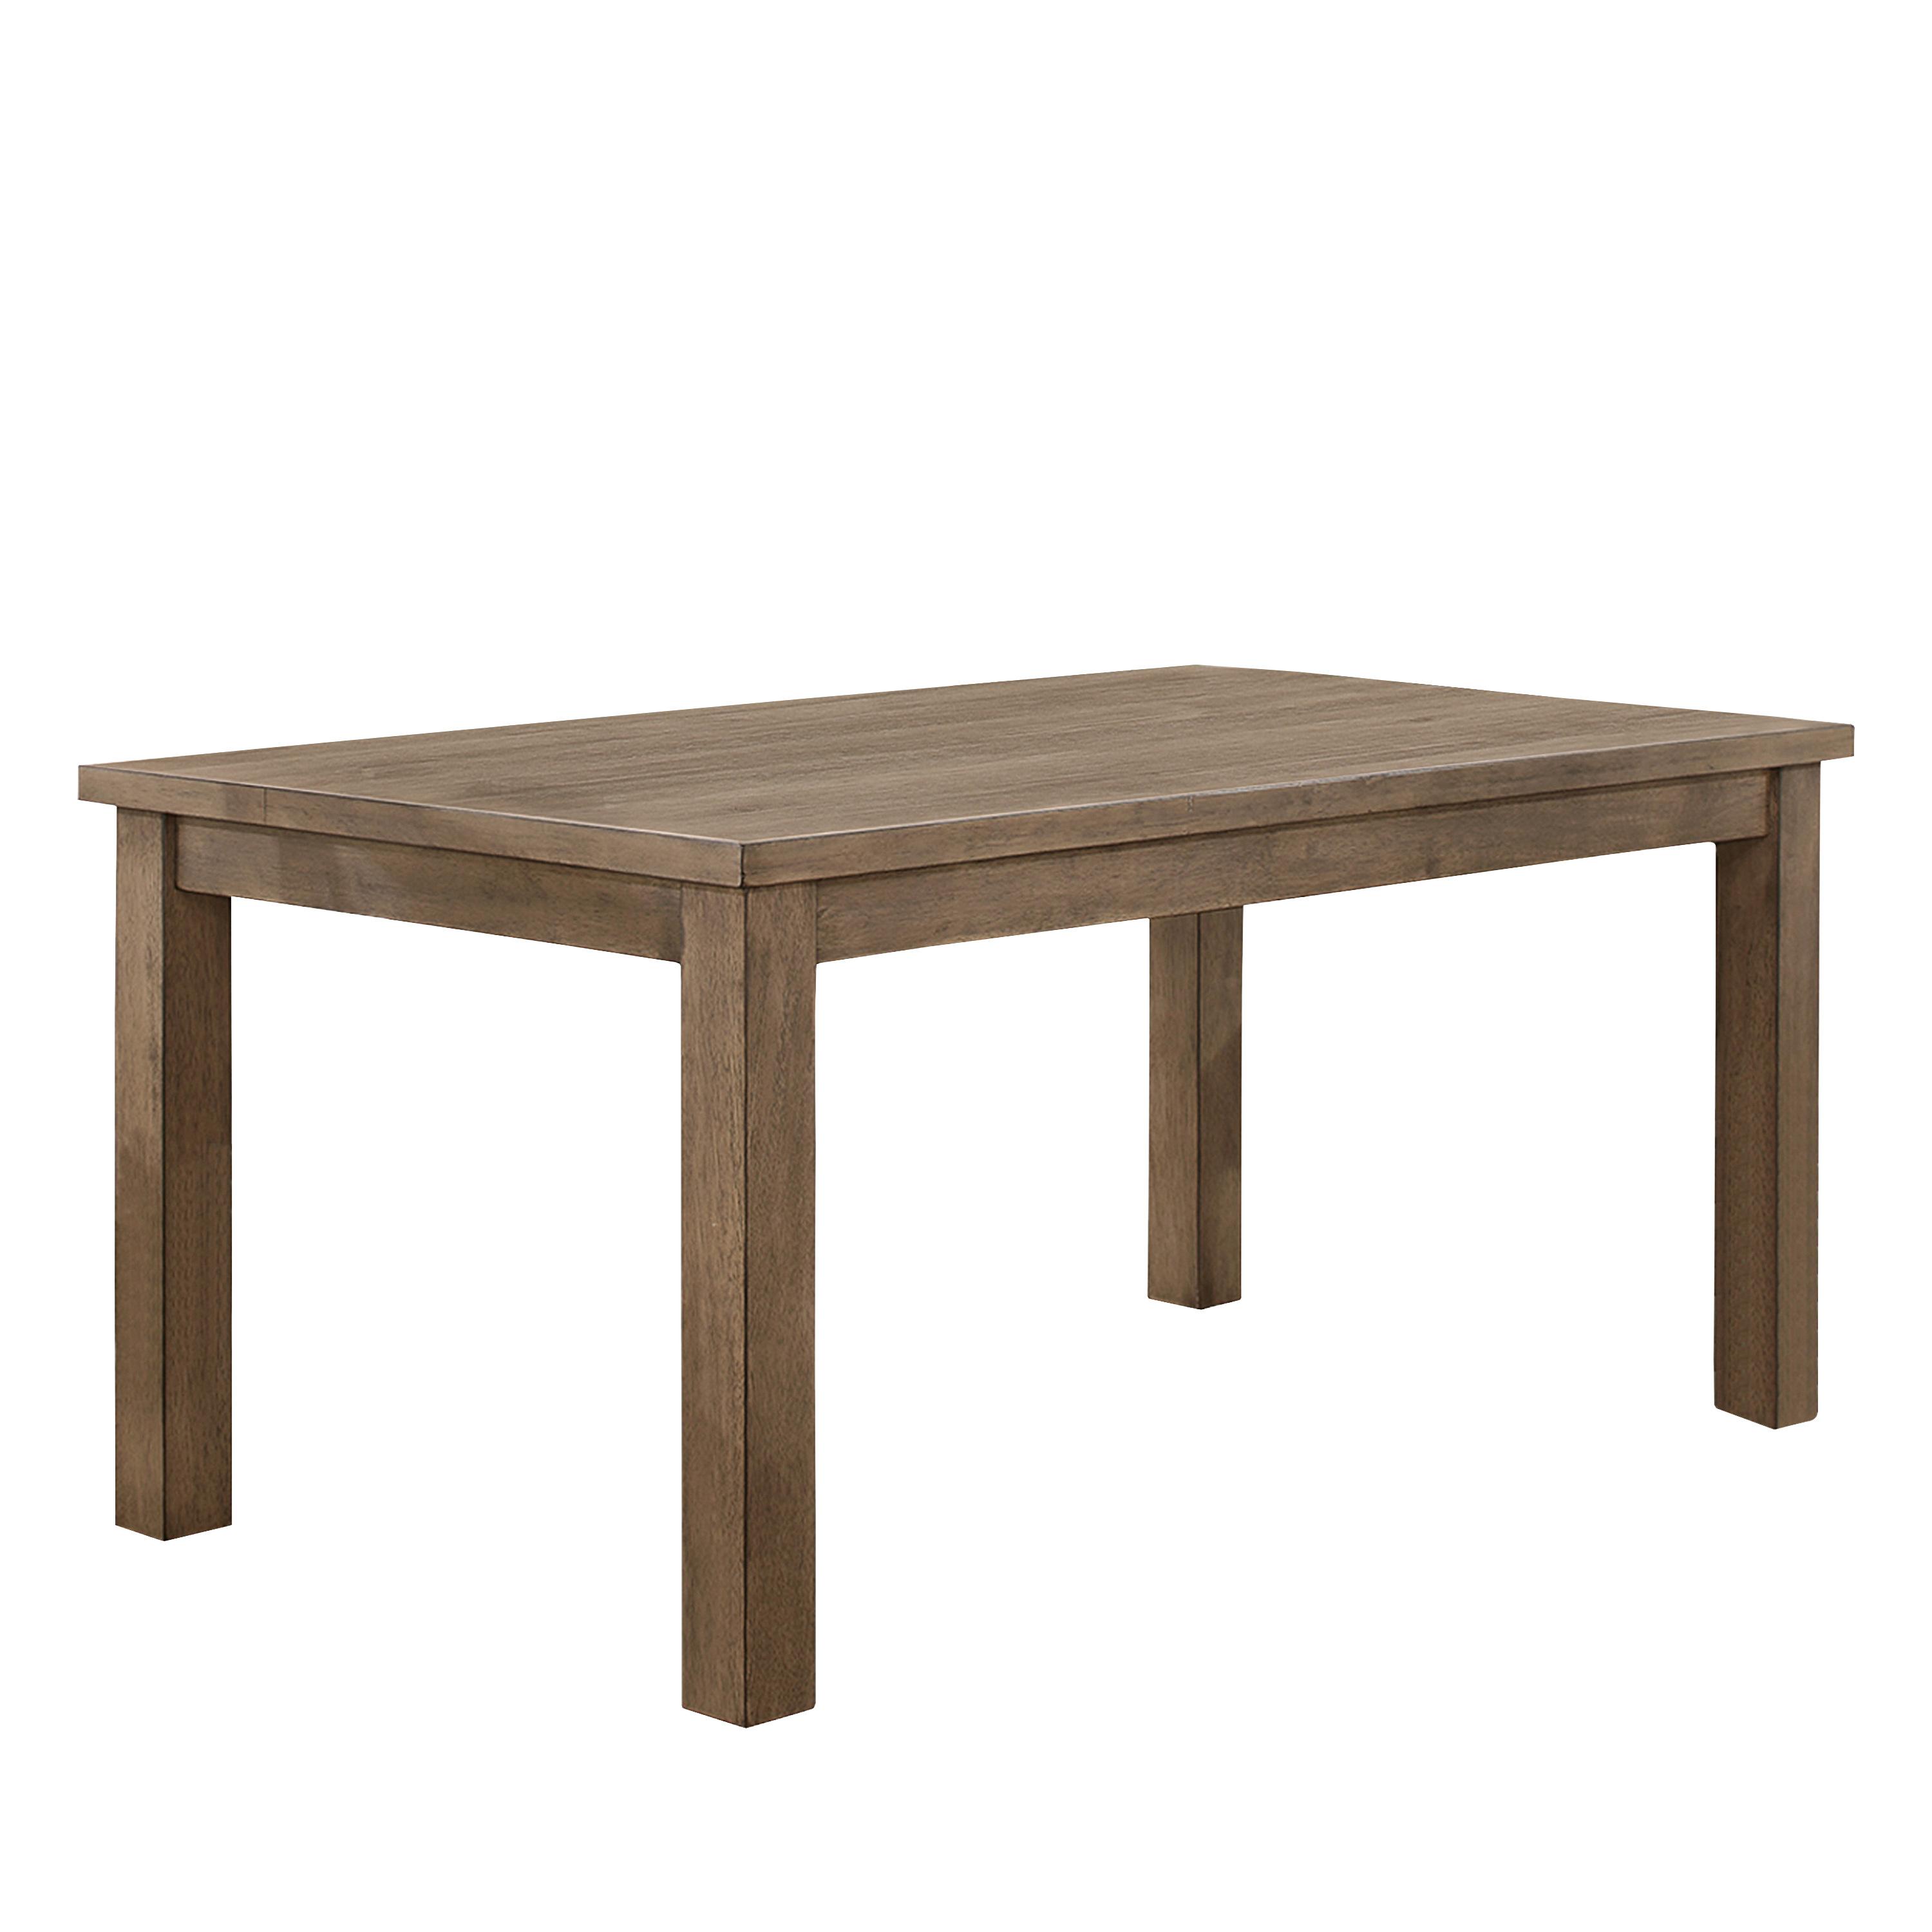 Transitional Dining Table 5516-66 Janina 5516-66 in Natural 